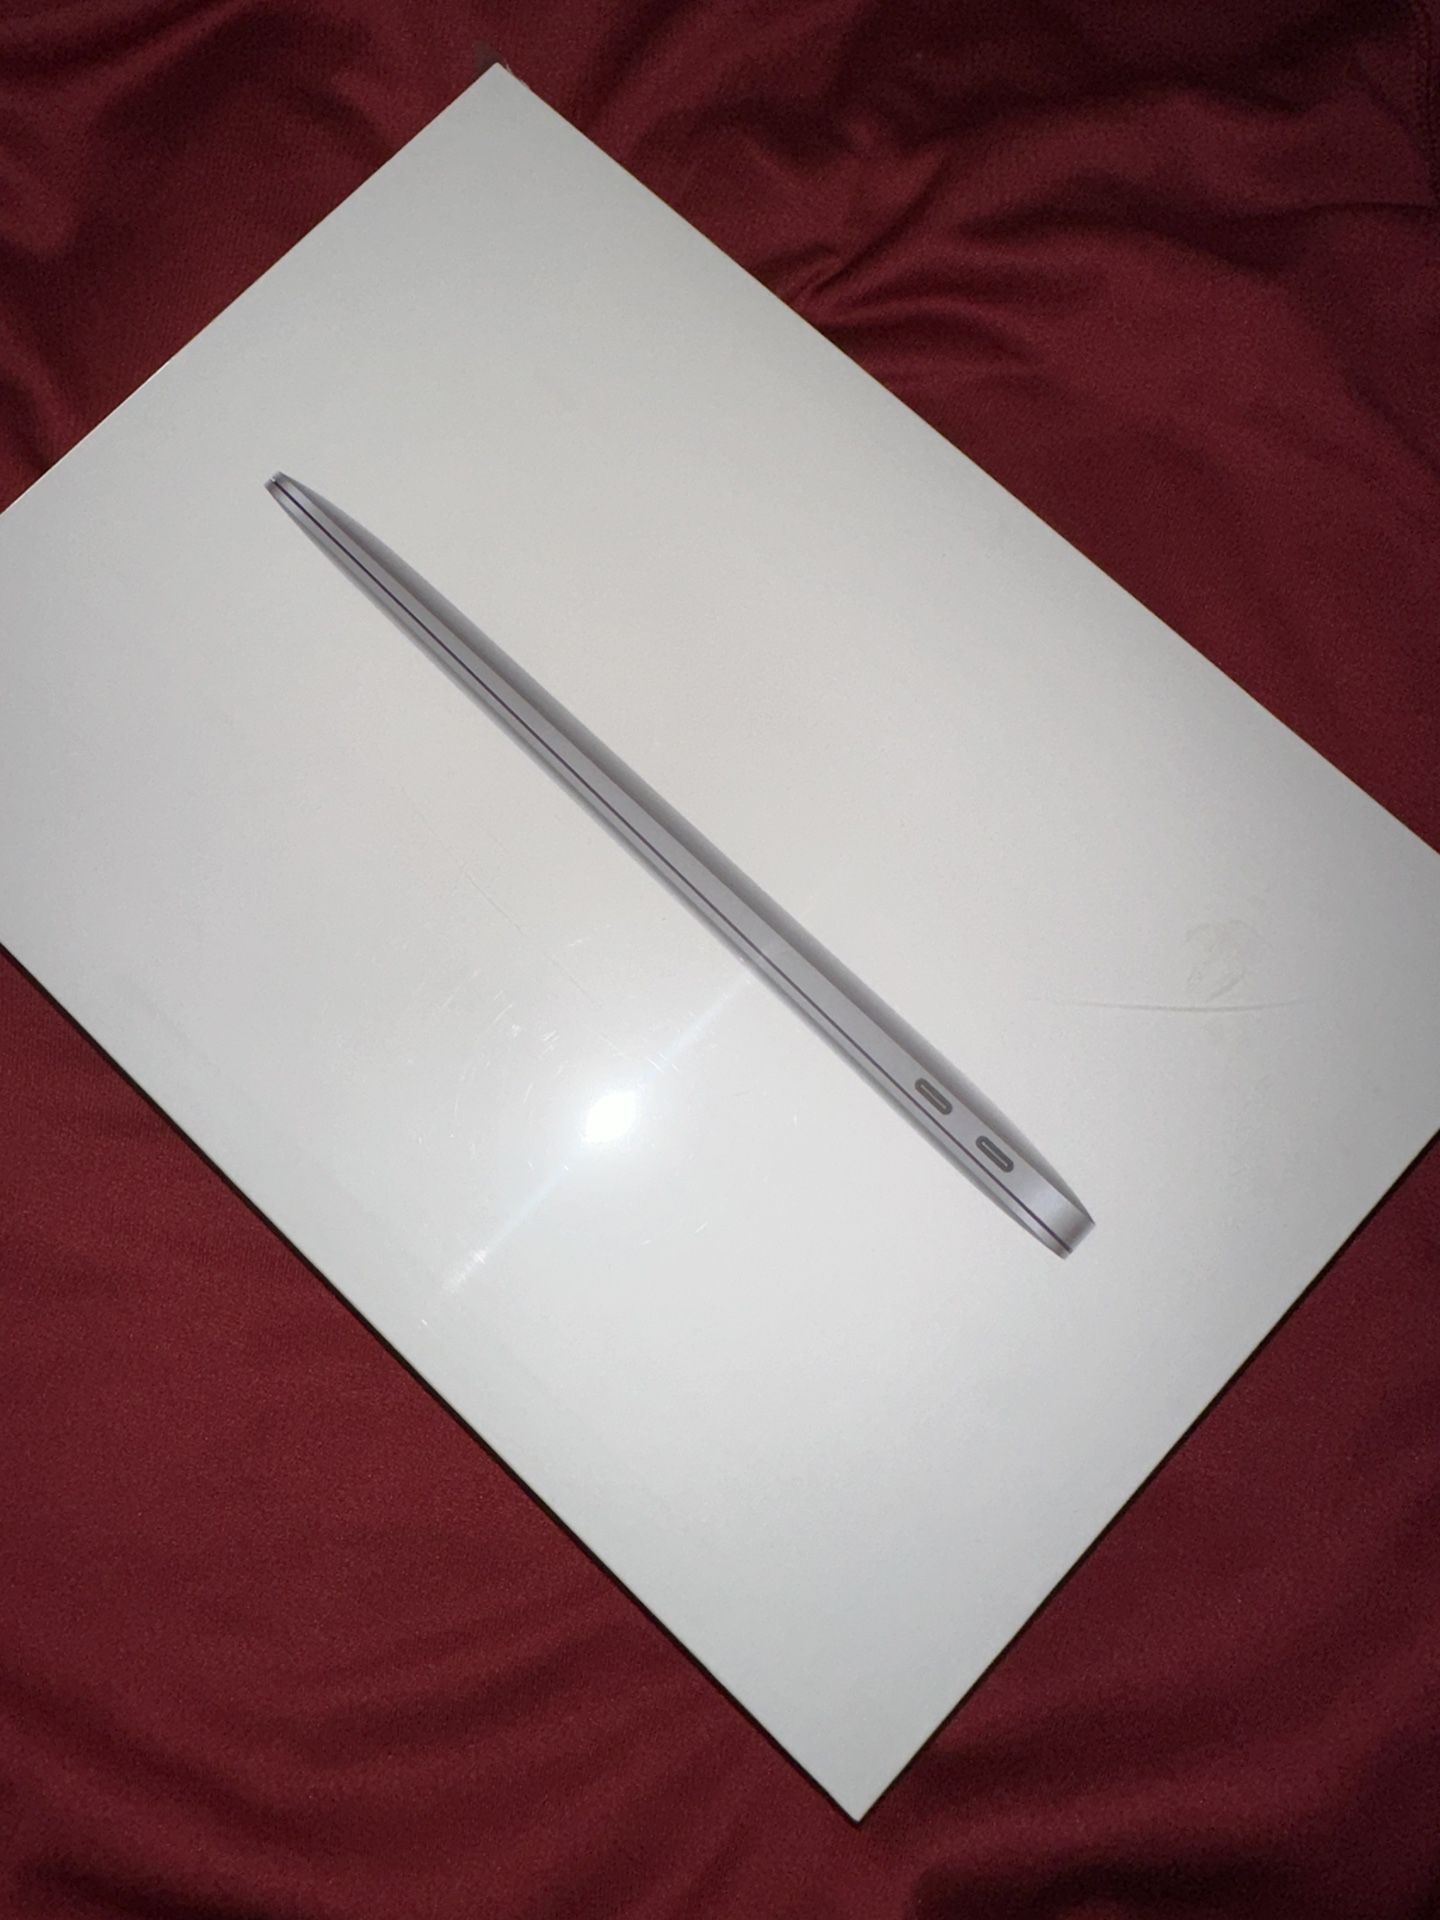 Space Gray Apple MacBook Air New 13 Inch With M1 Chip With 8gb Ram 256gb SSD New Sealed 